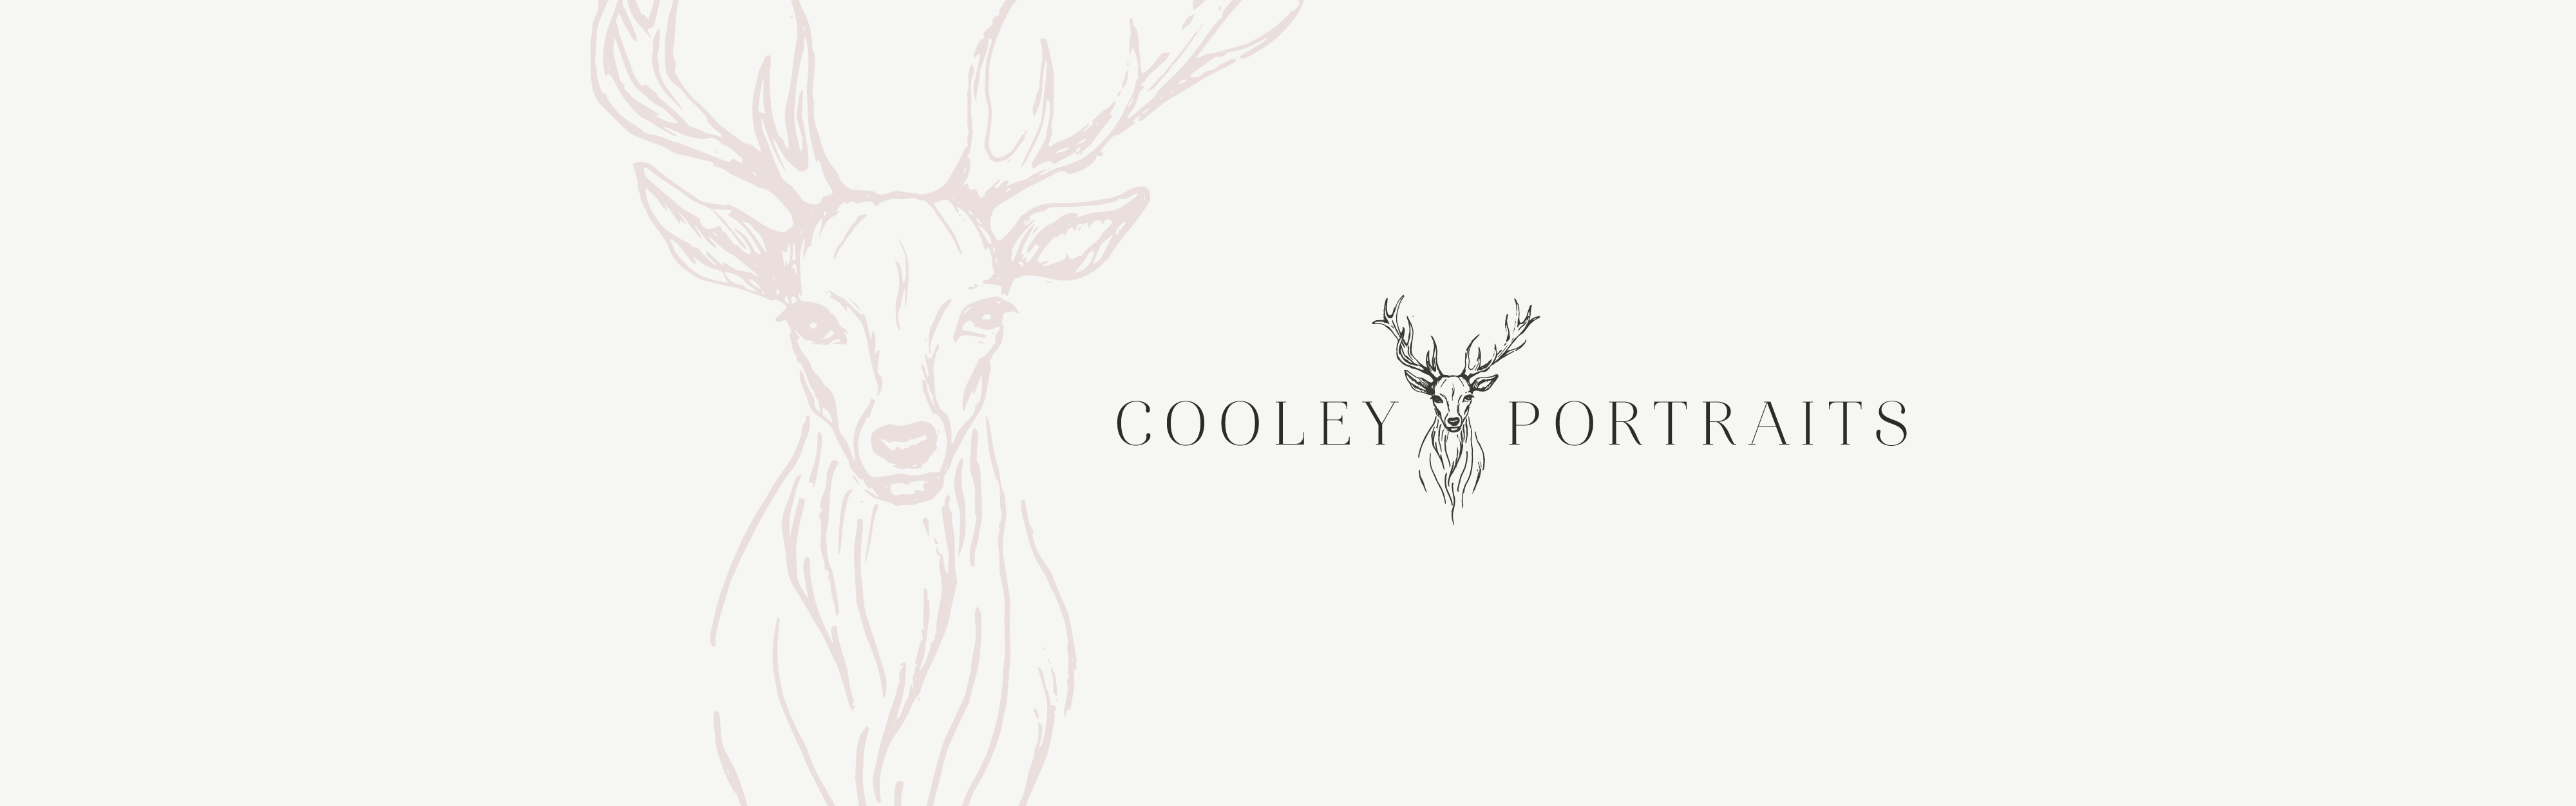 The image displays a Cooley Portraits company logo, featuring an illustration of a stag's head with elaborate antlers centered above the business name.